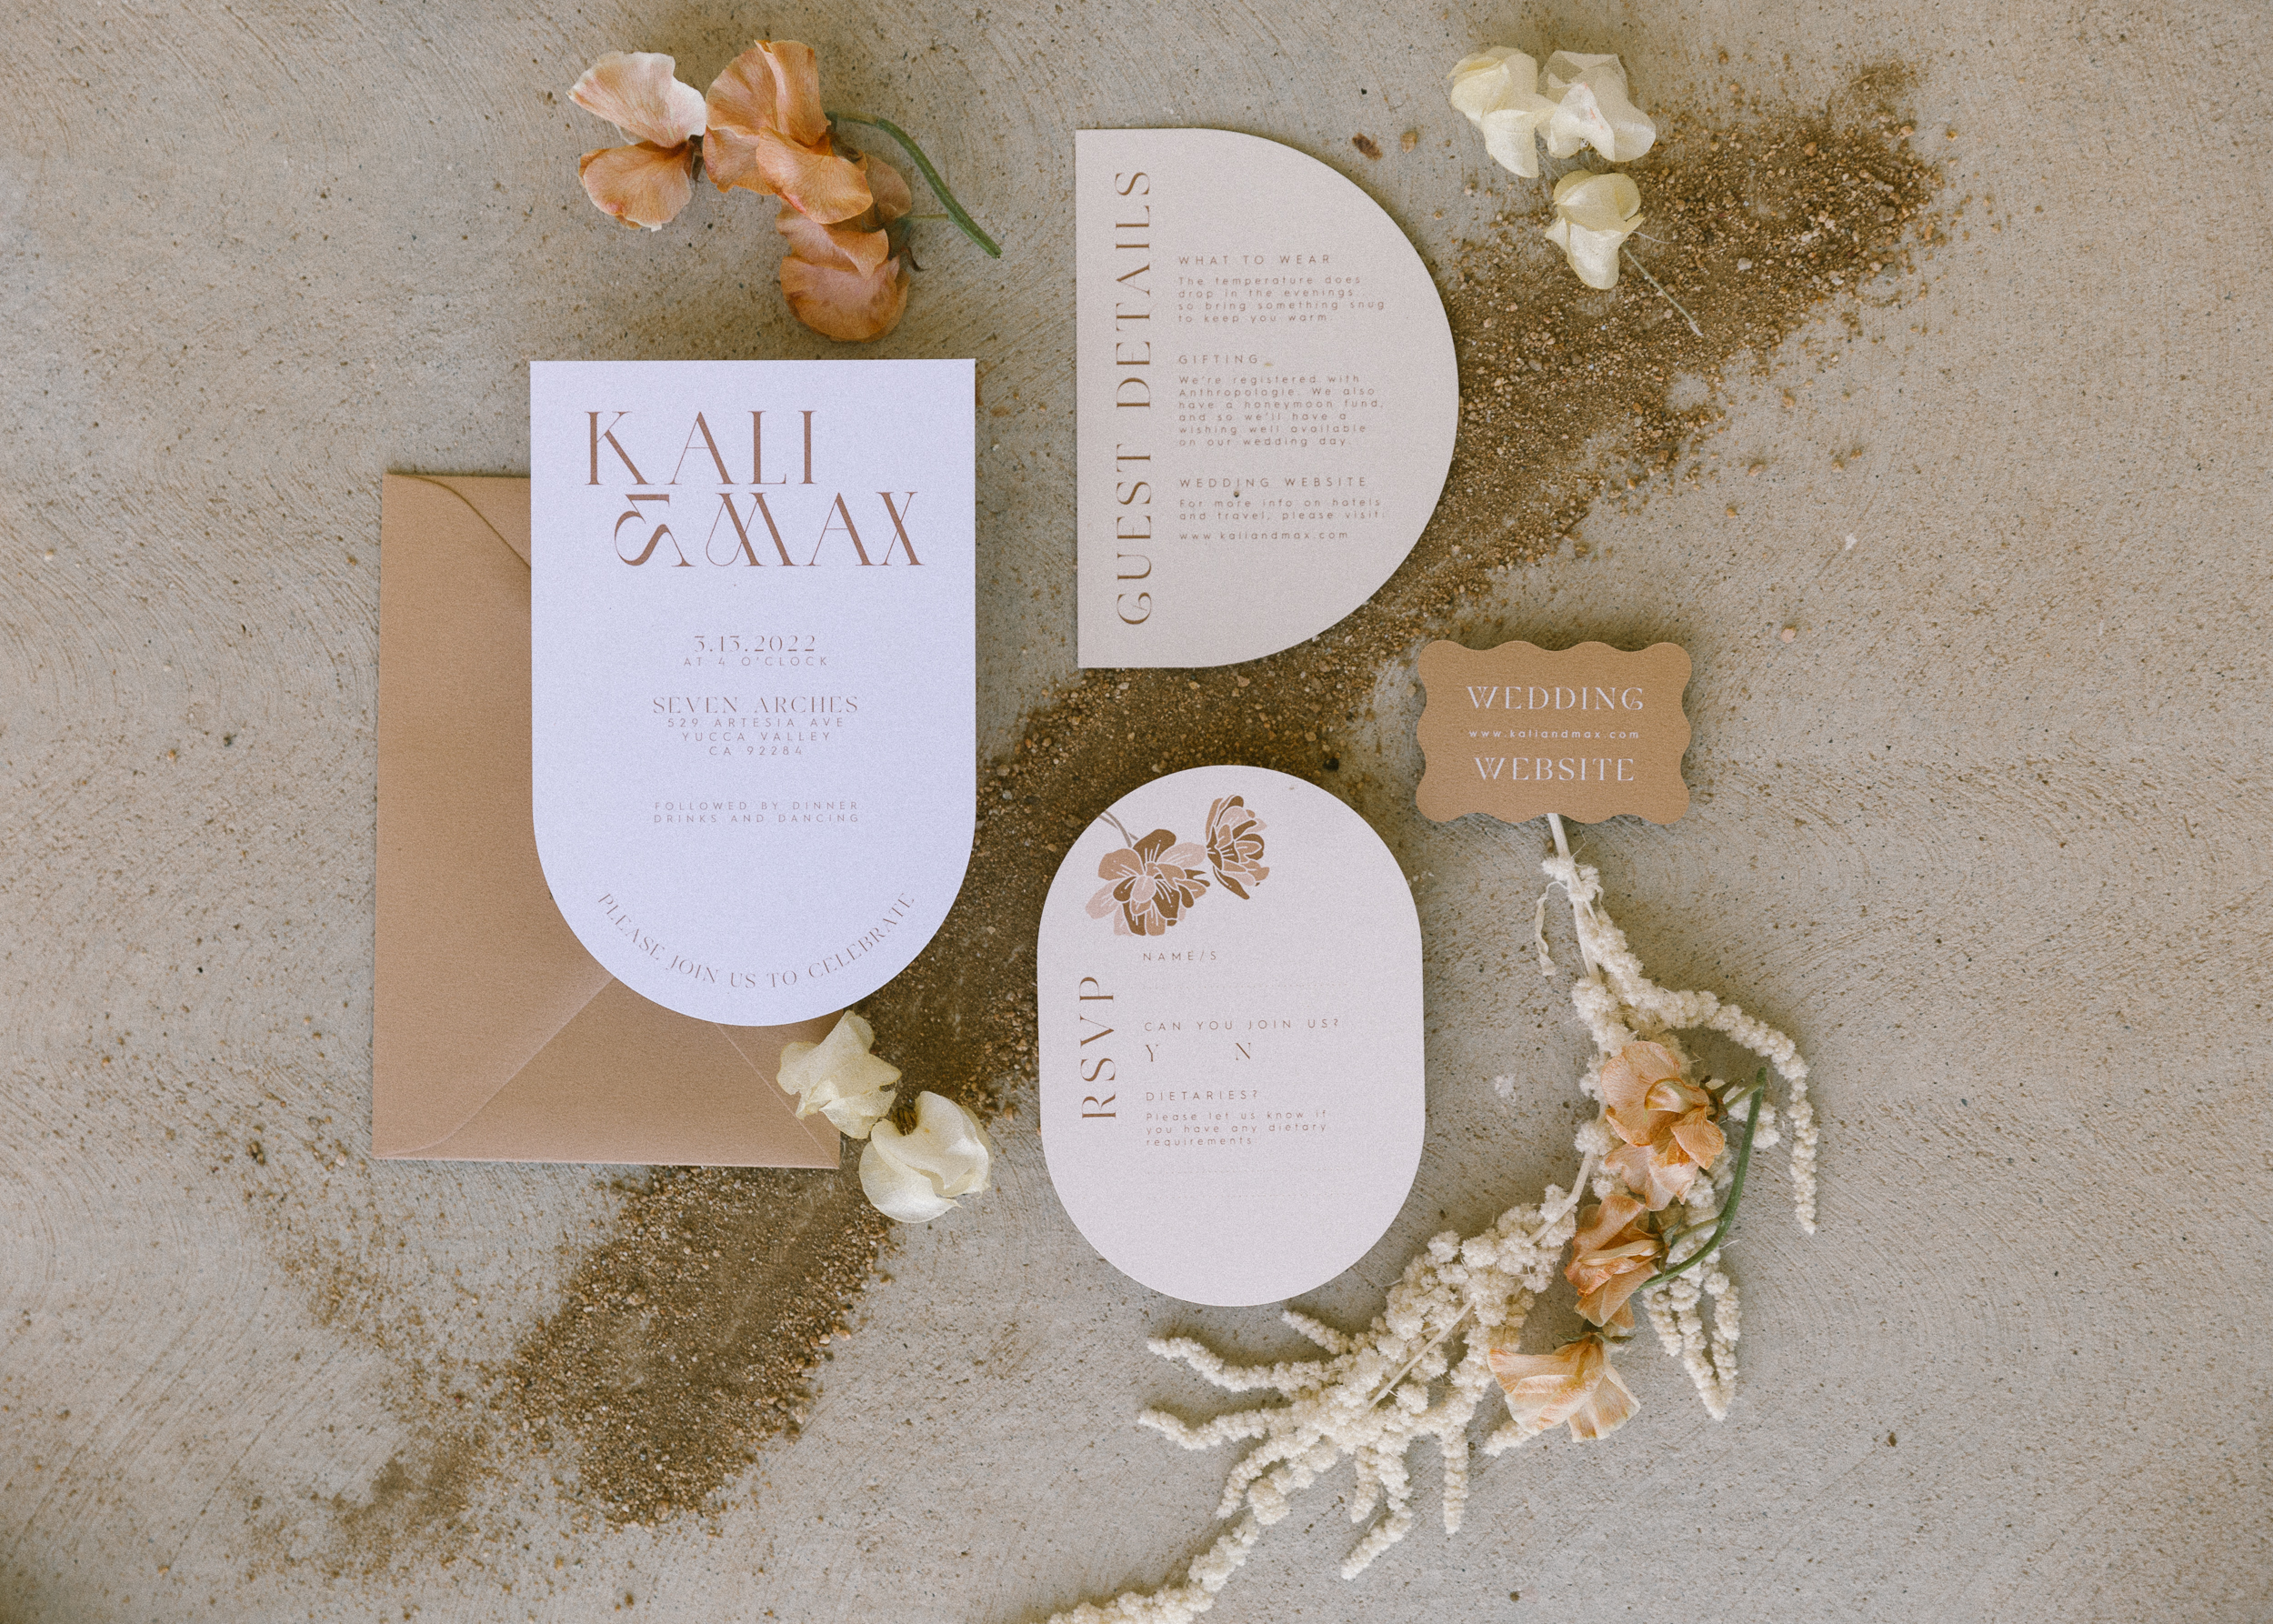 wedding invitations and florals set out in a flatlay image